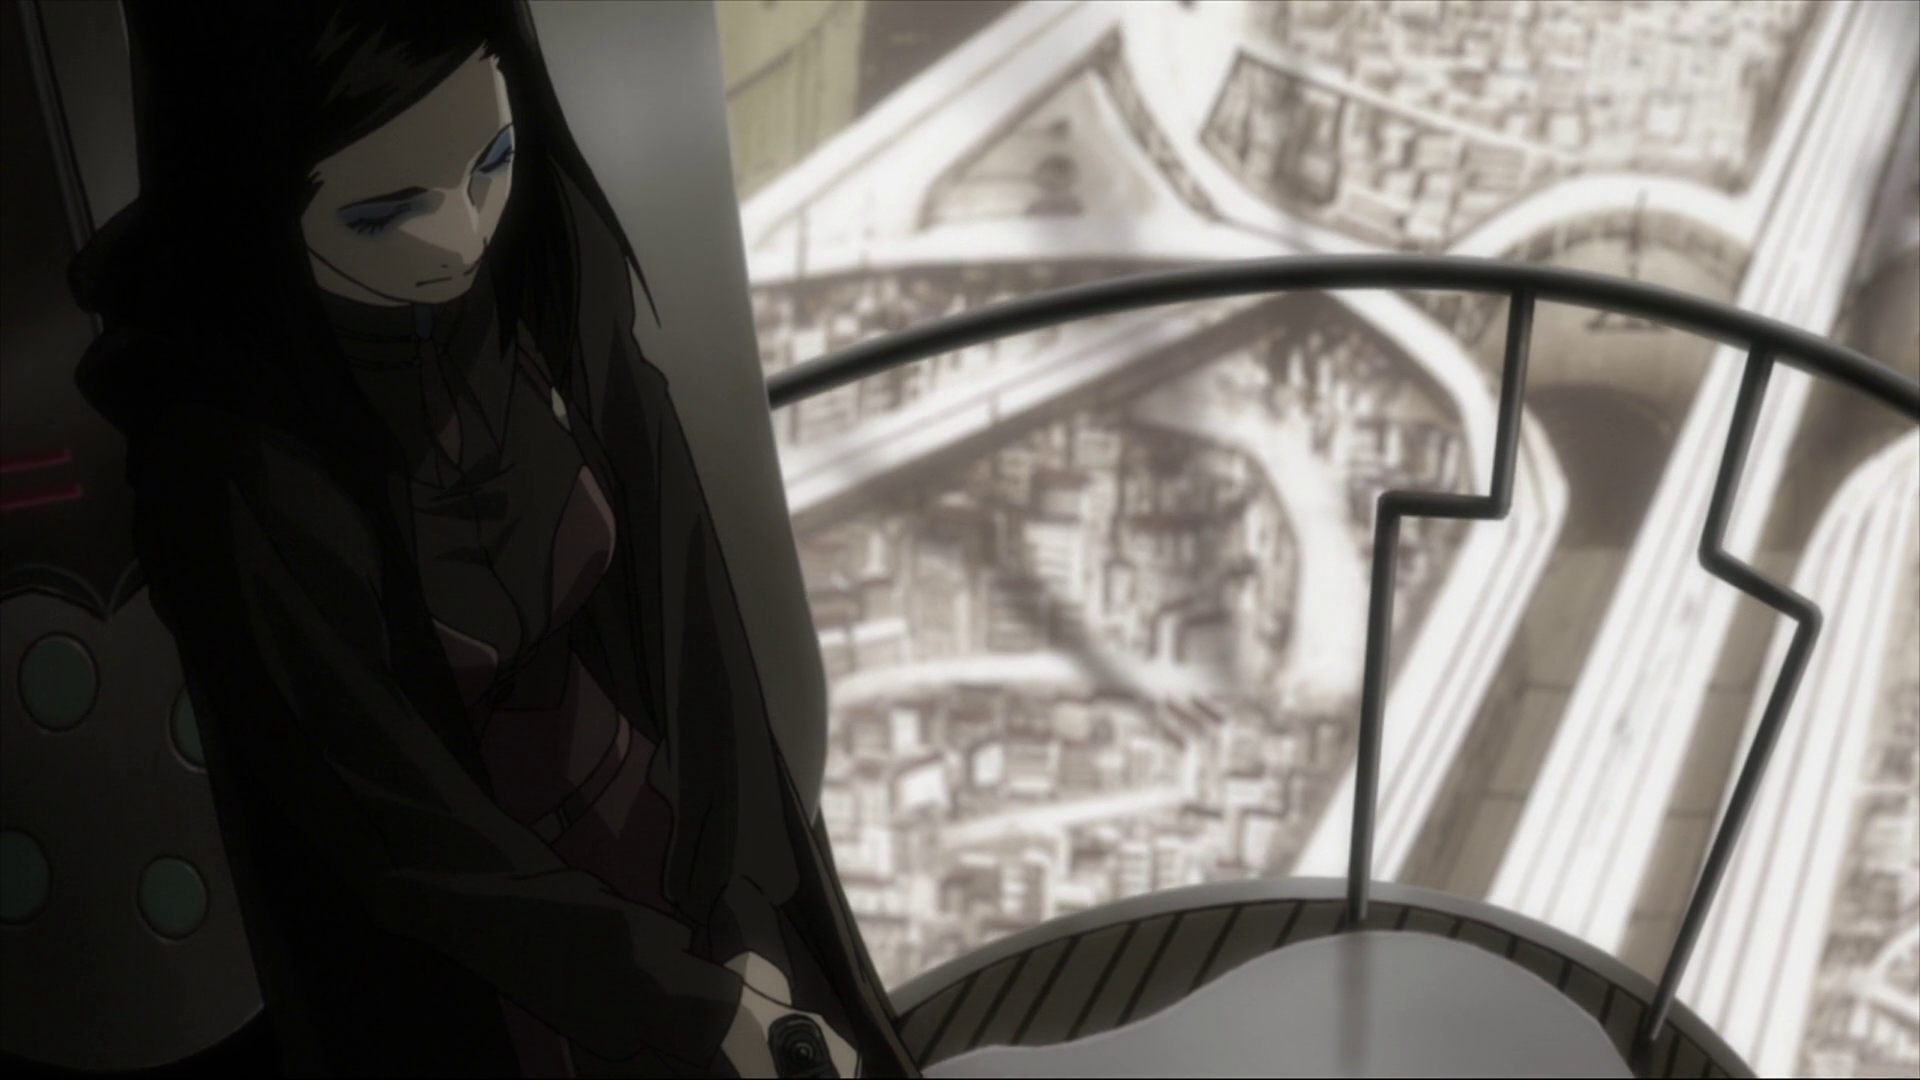 Technology is Overrated — Ergo Proxy Review